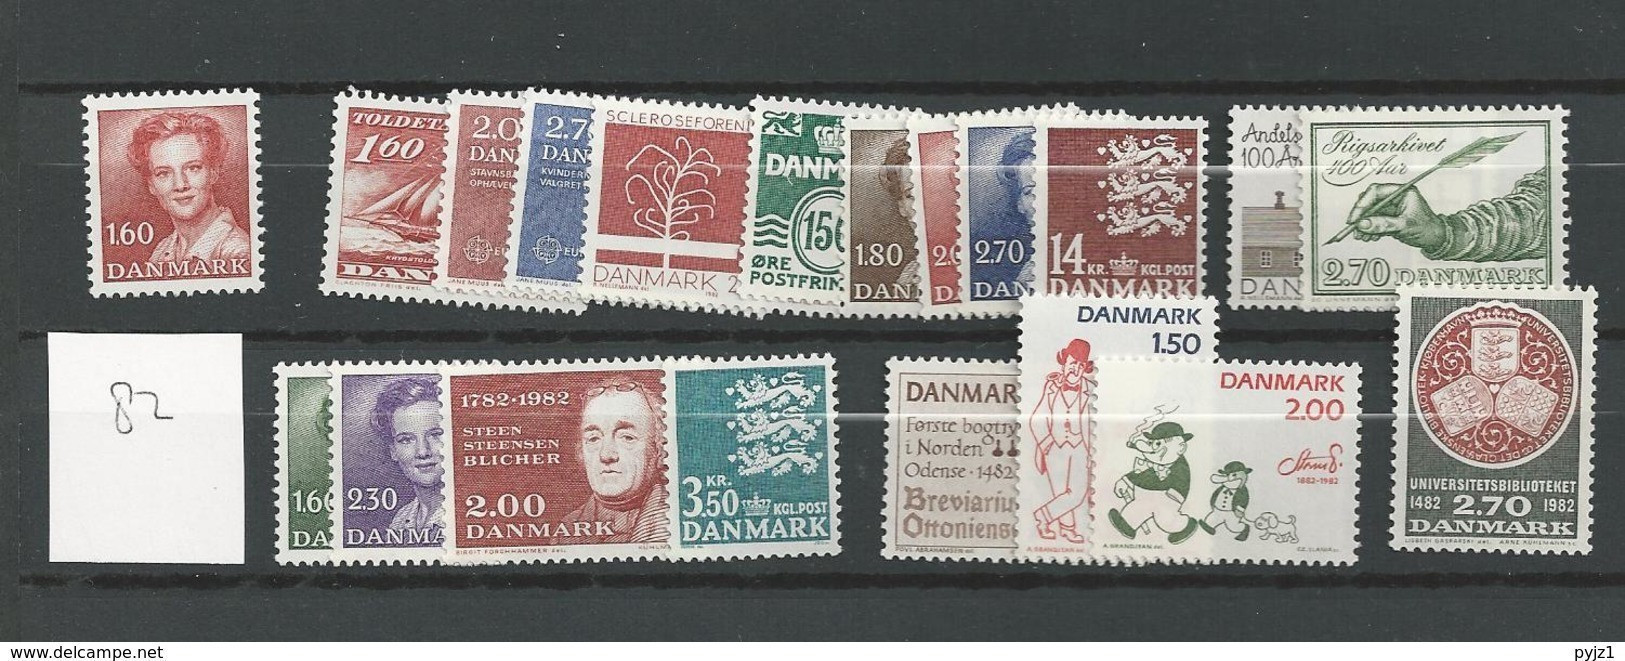 1982 MNH Denmark, Year Complete Postfris** - Annate Complete